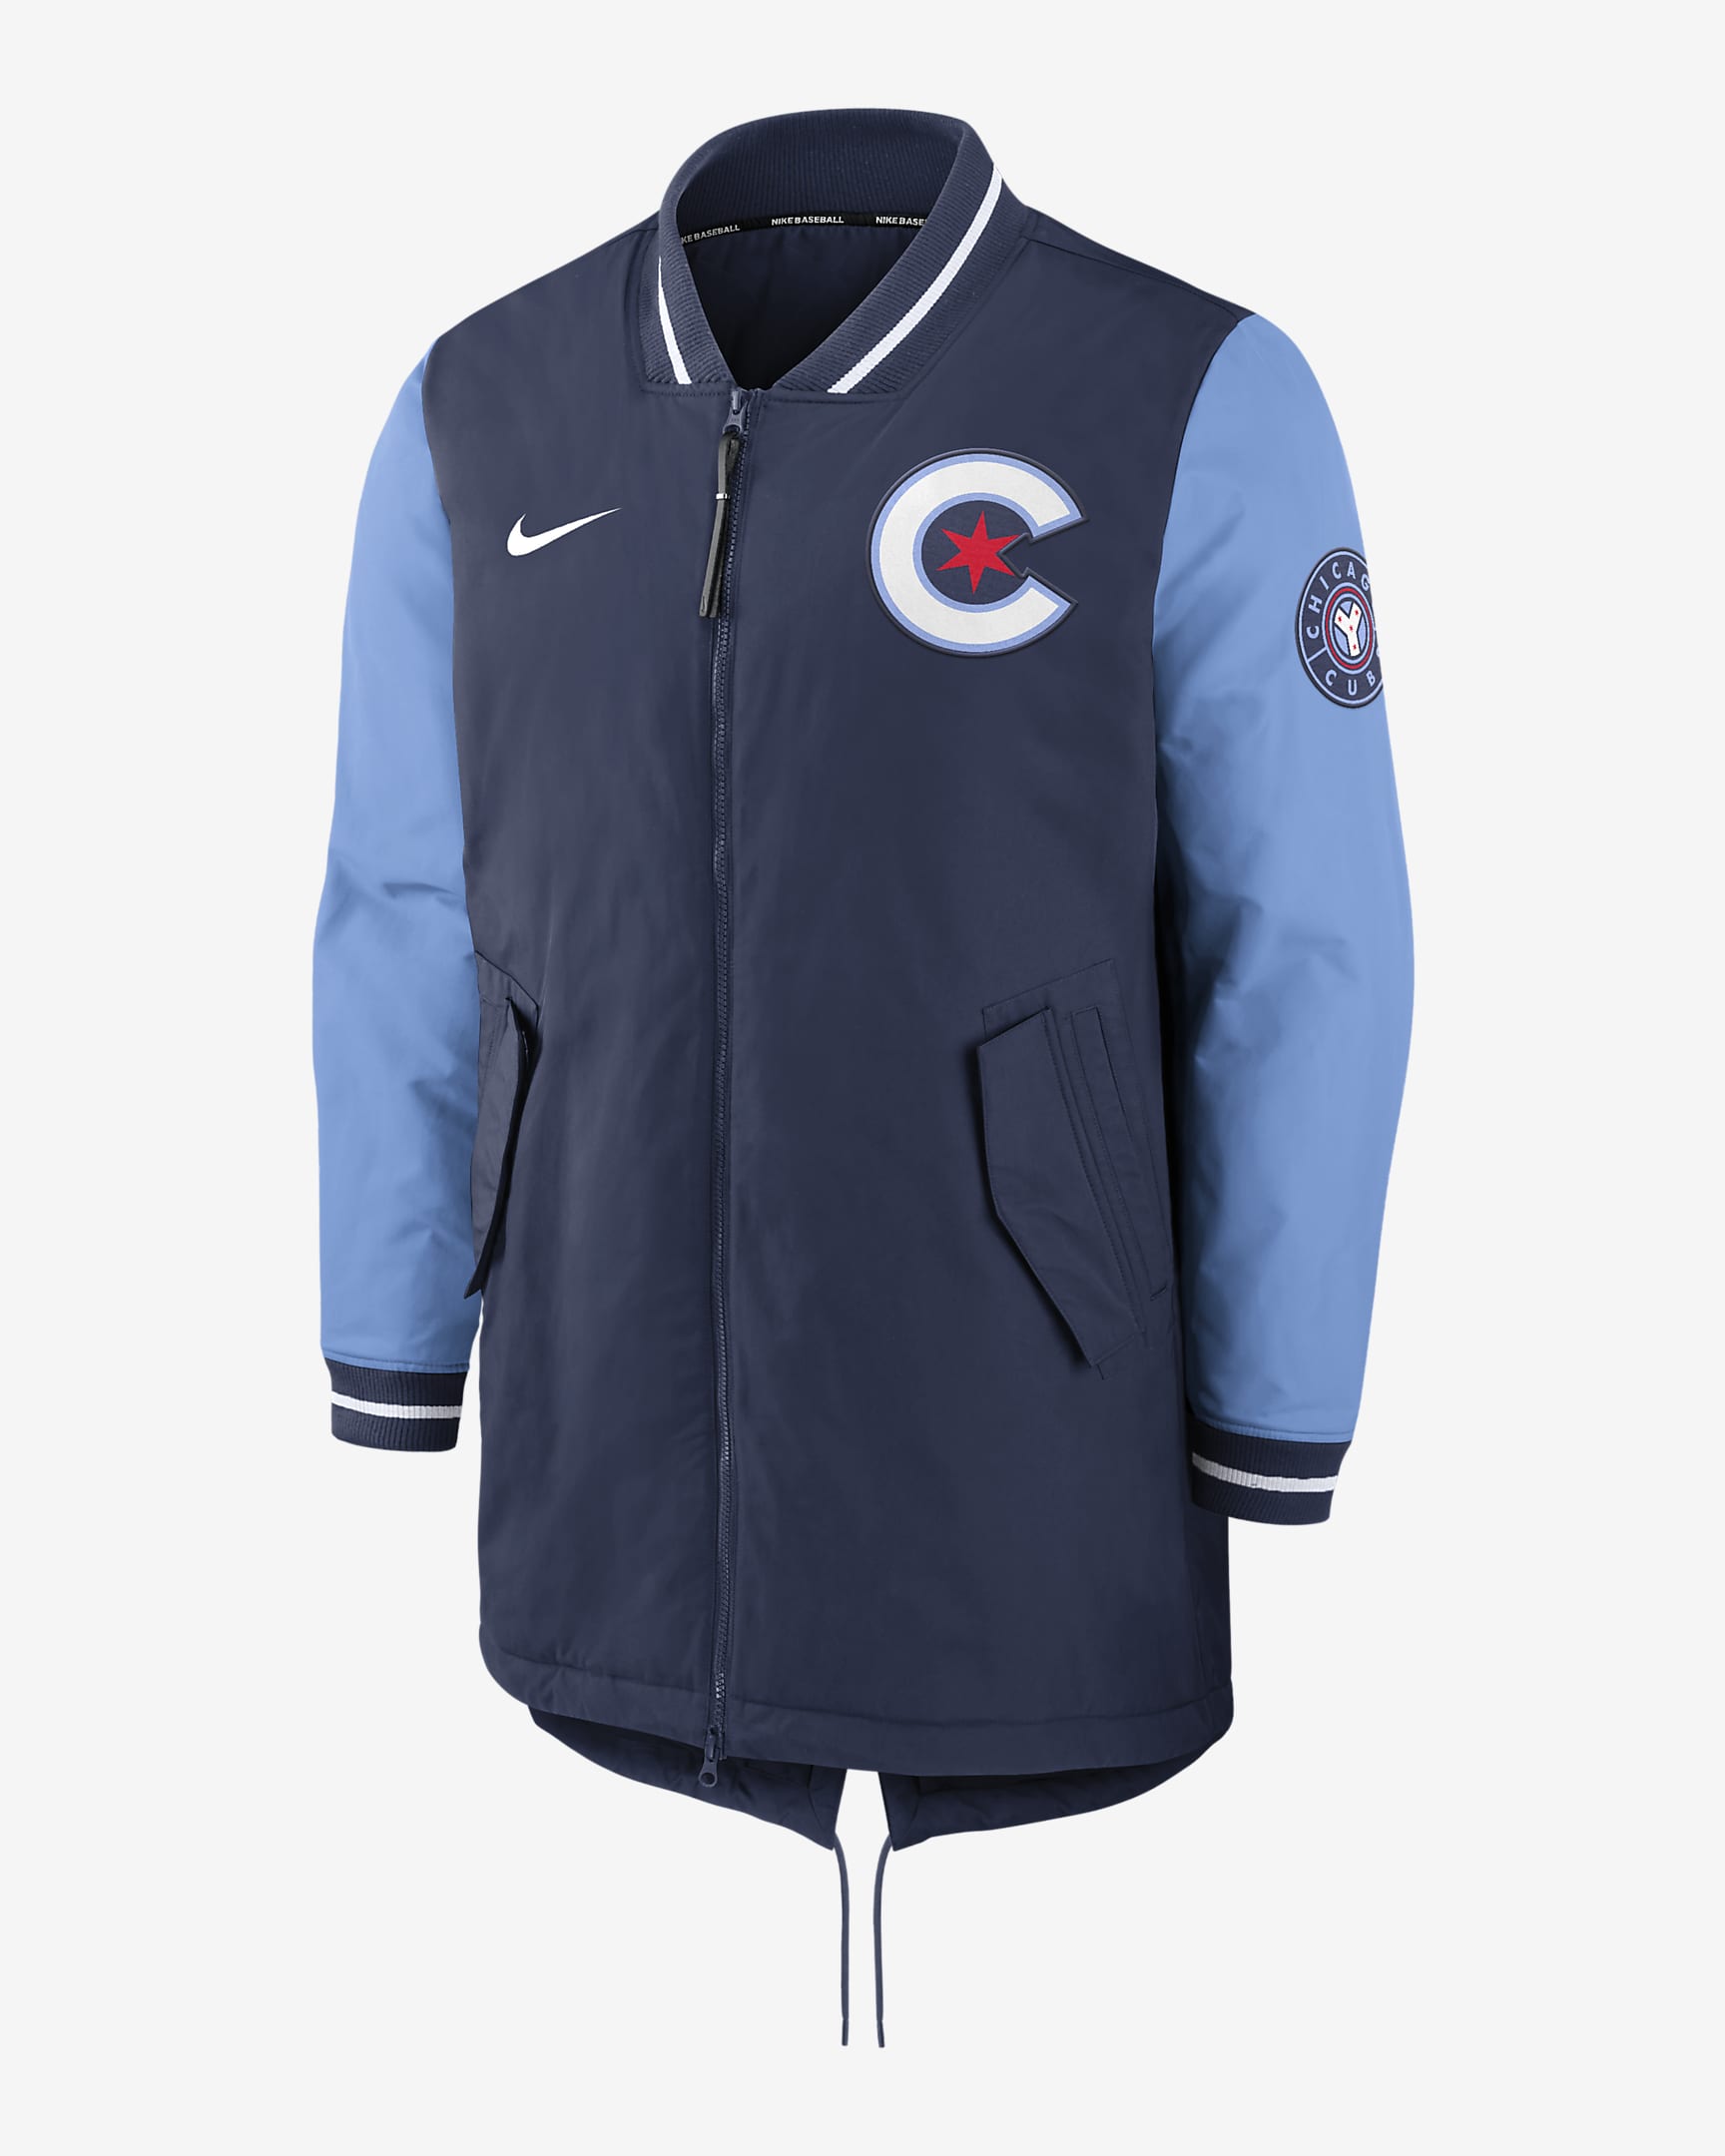  MLB Chicago Cubs Big & Tall Therma Base Premier Jacket :  Sports Related Merchandise : Sports & Outdoors